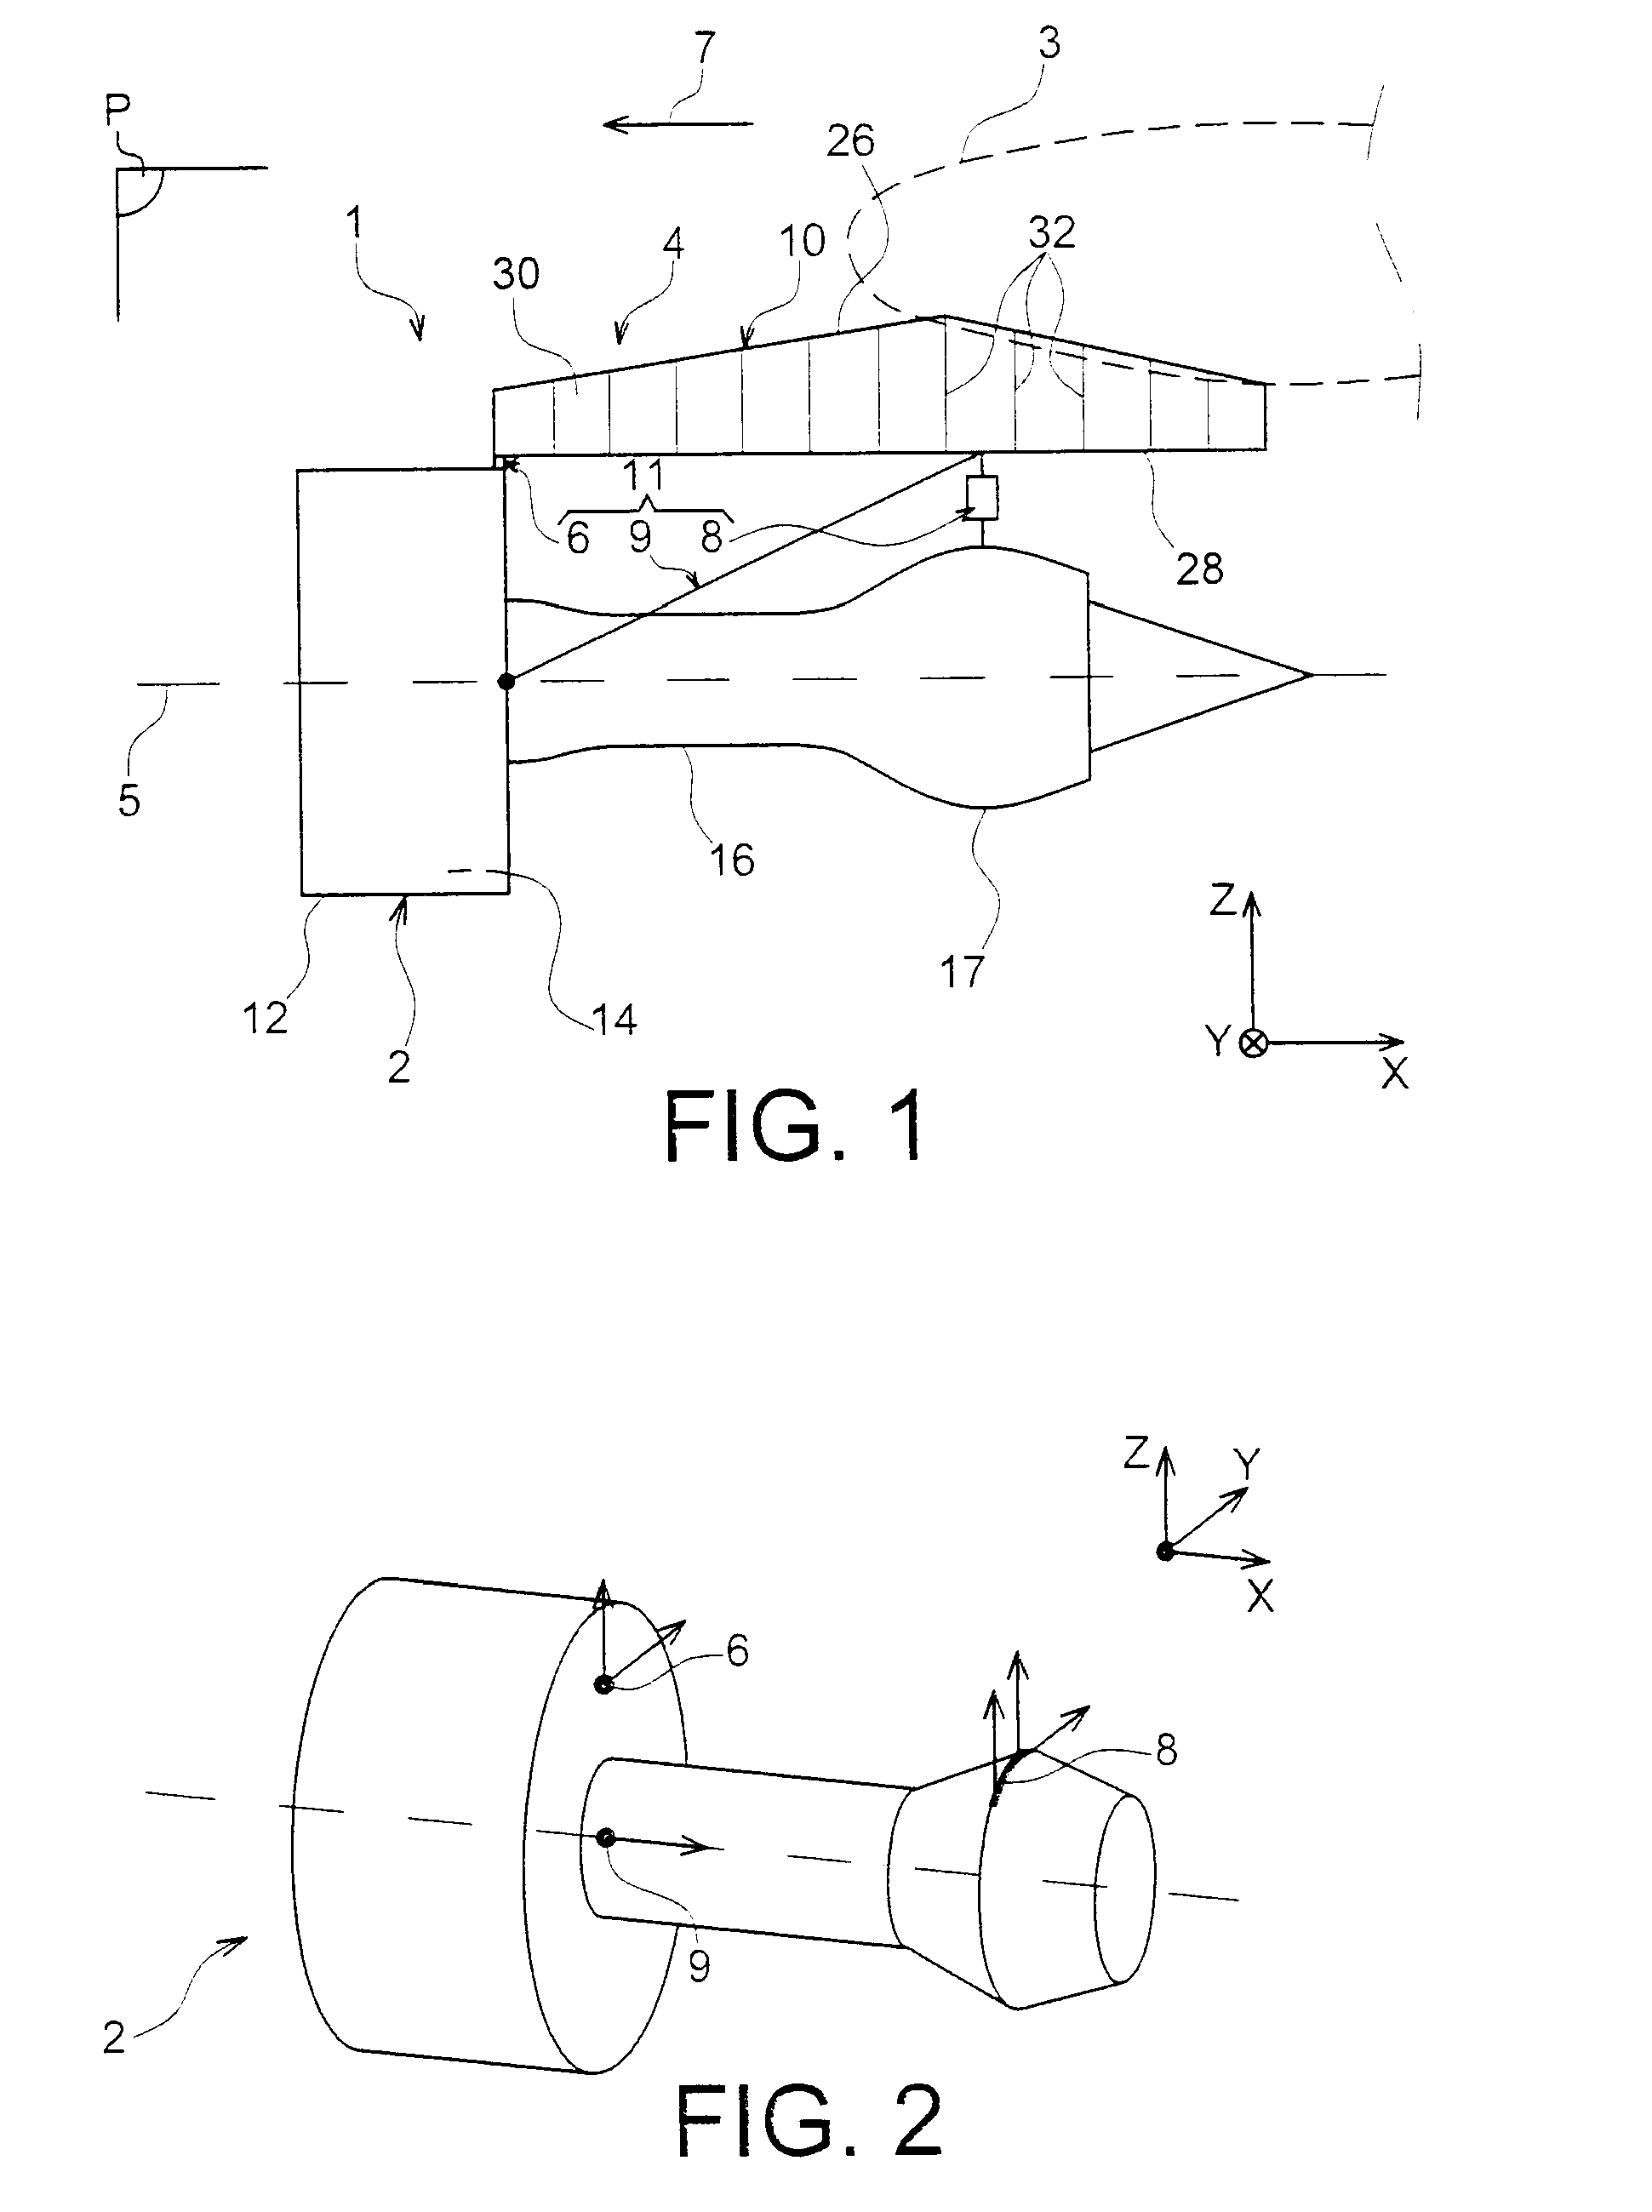 Attachment pylon for aircraft having a rear engine attachment beam offset from the caisson